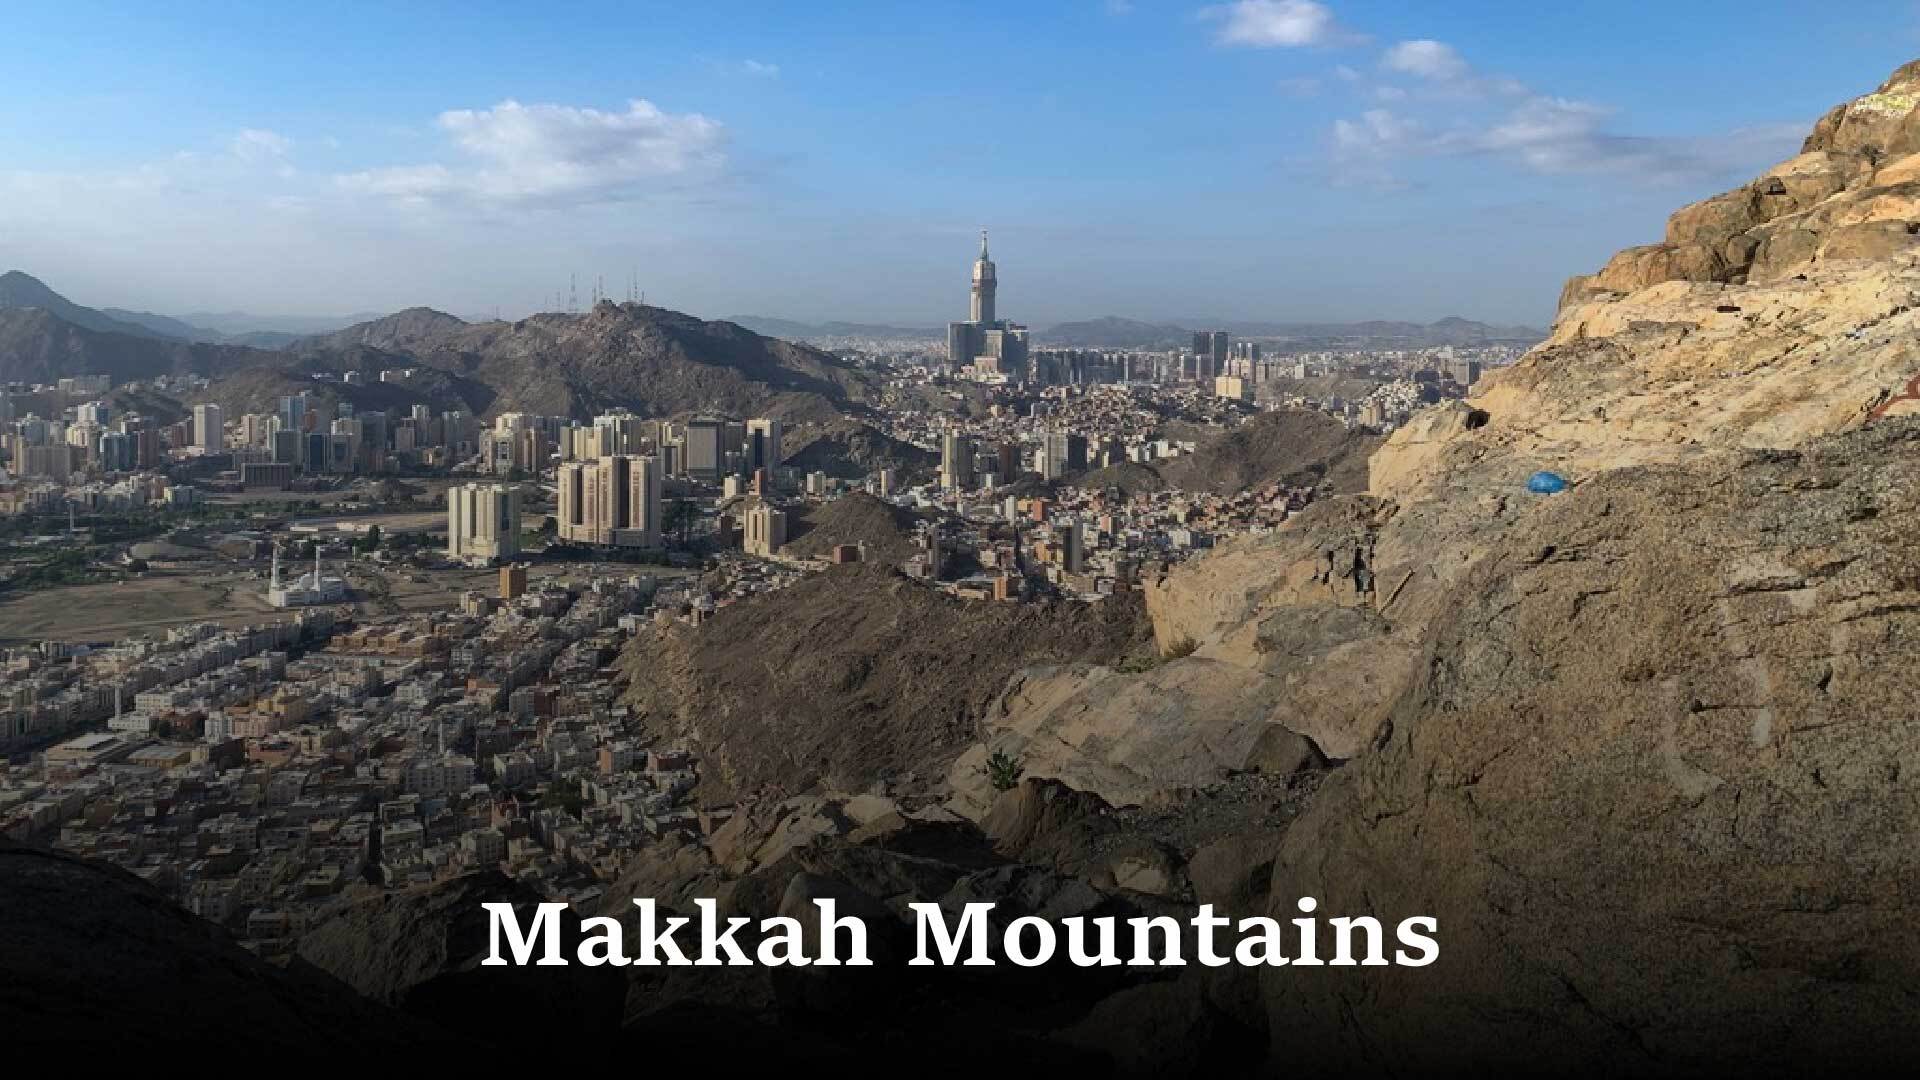 Historical Mountains of Holy Makkah